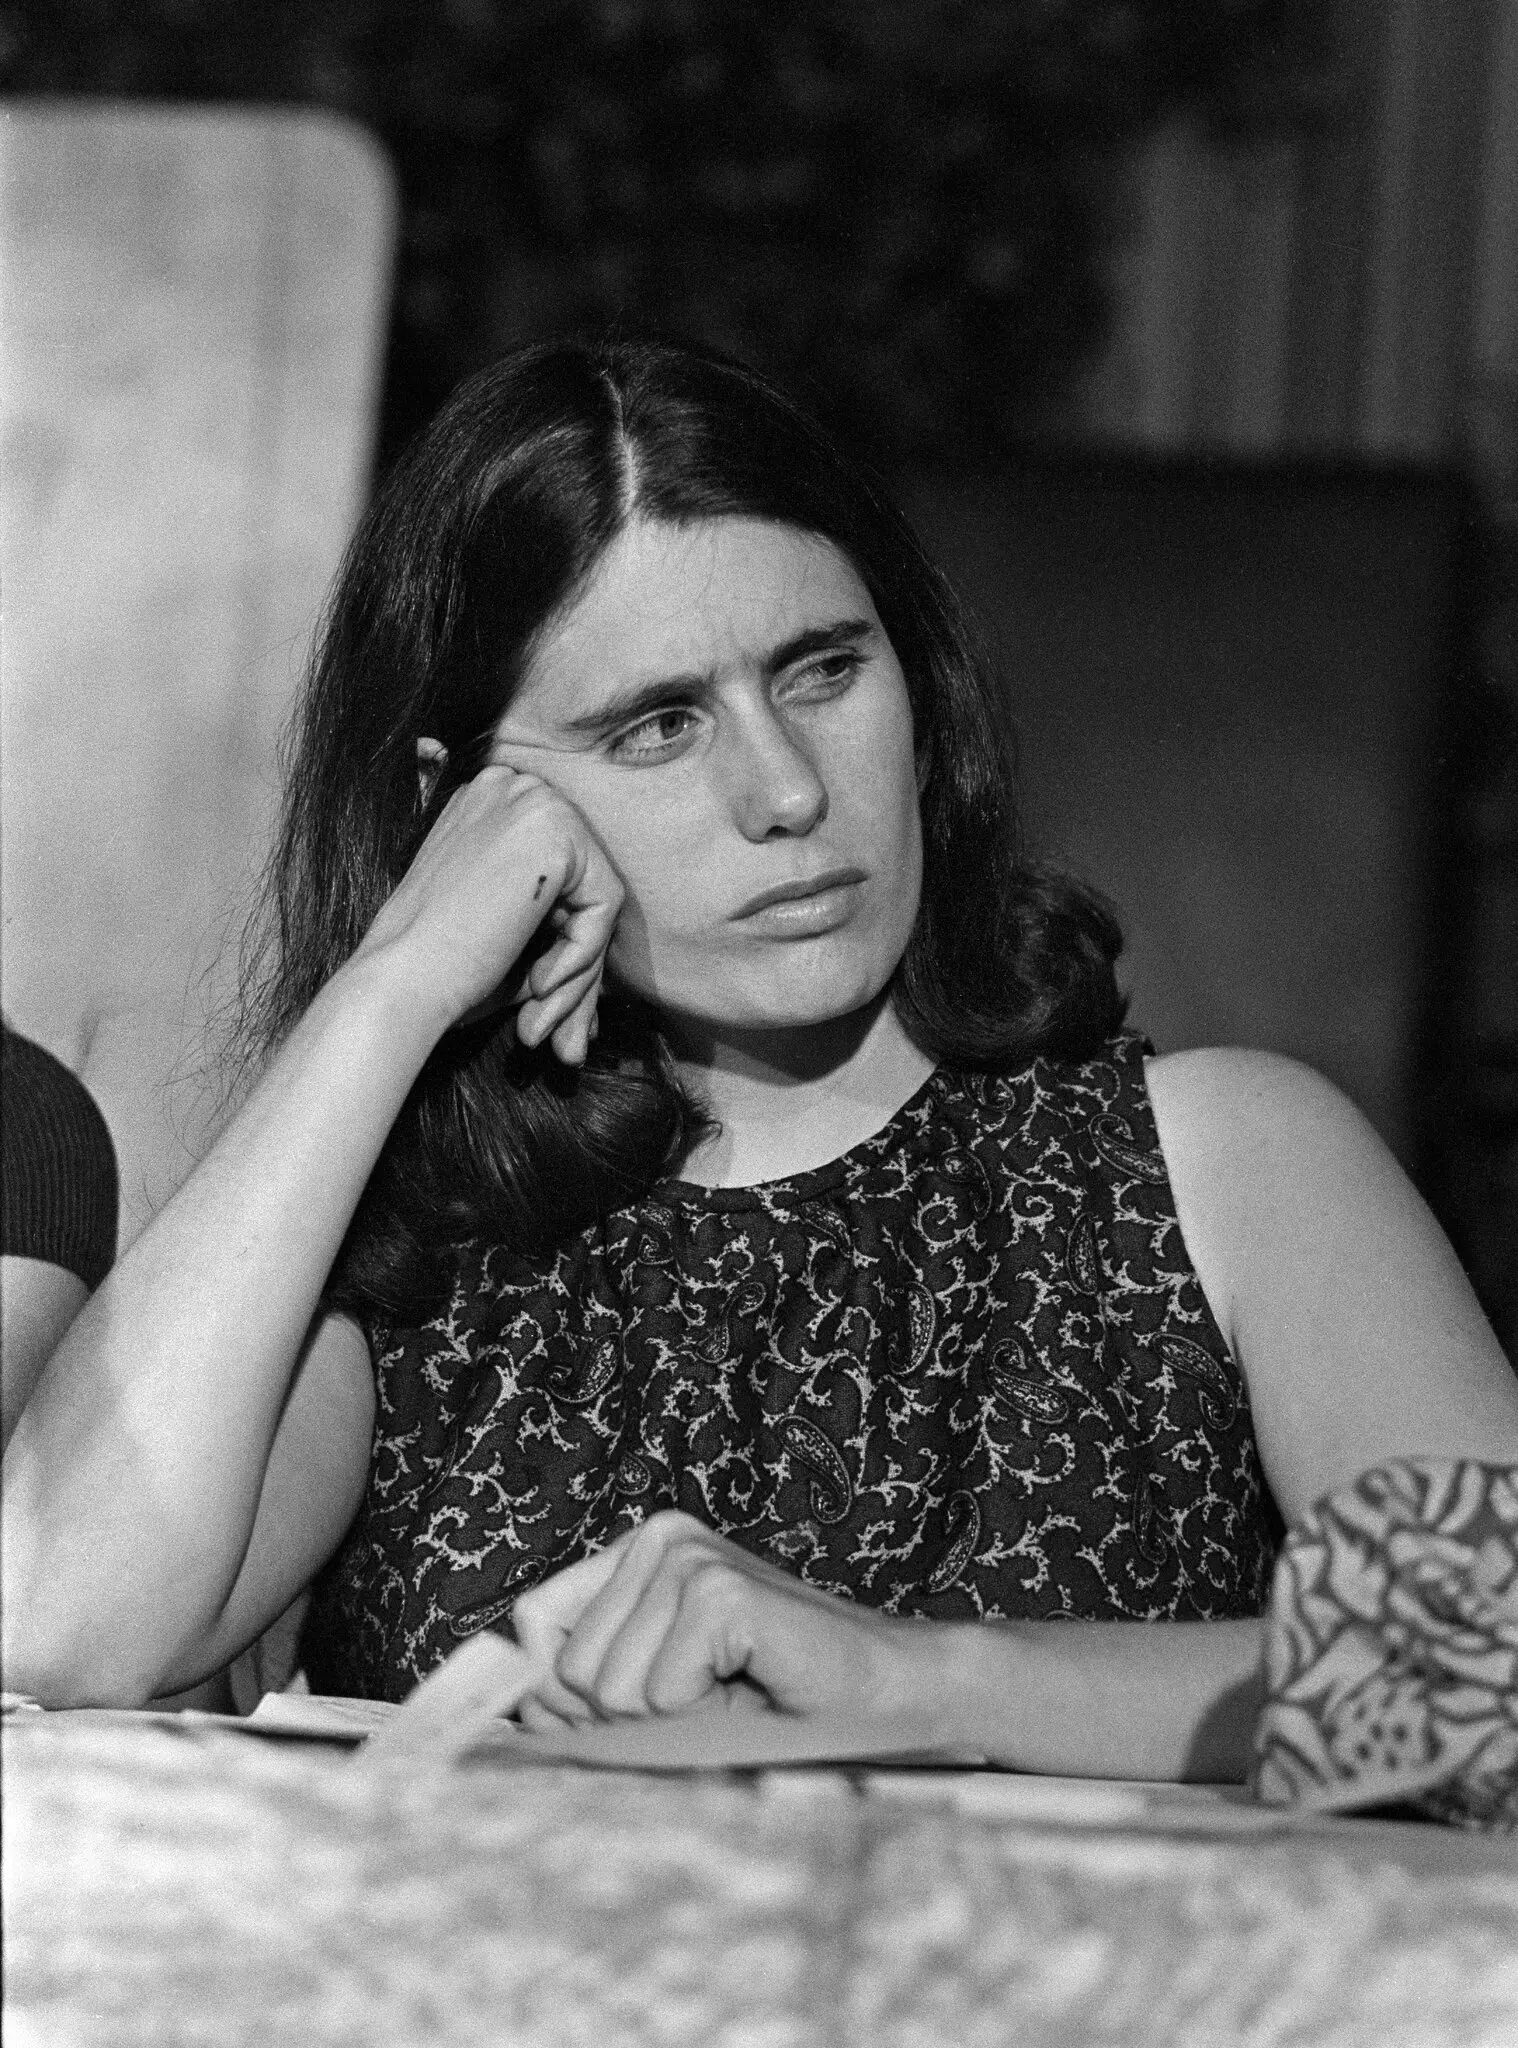 Kathy Boudin at a news conference in 1969, when she was part of the radical group the Weather Underground. Credit...Michael Evans/The New York Times